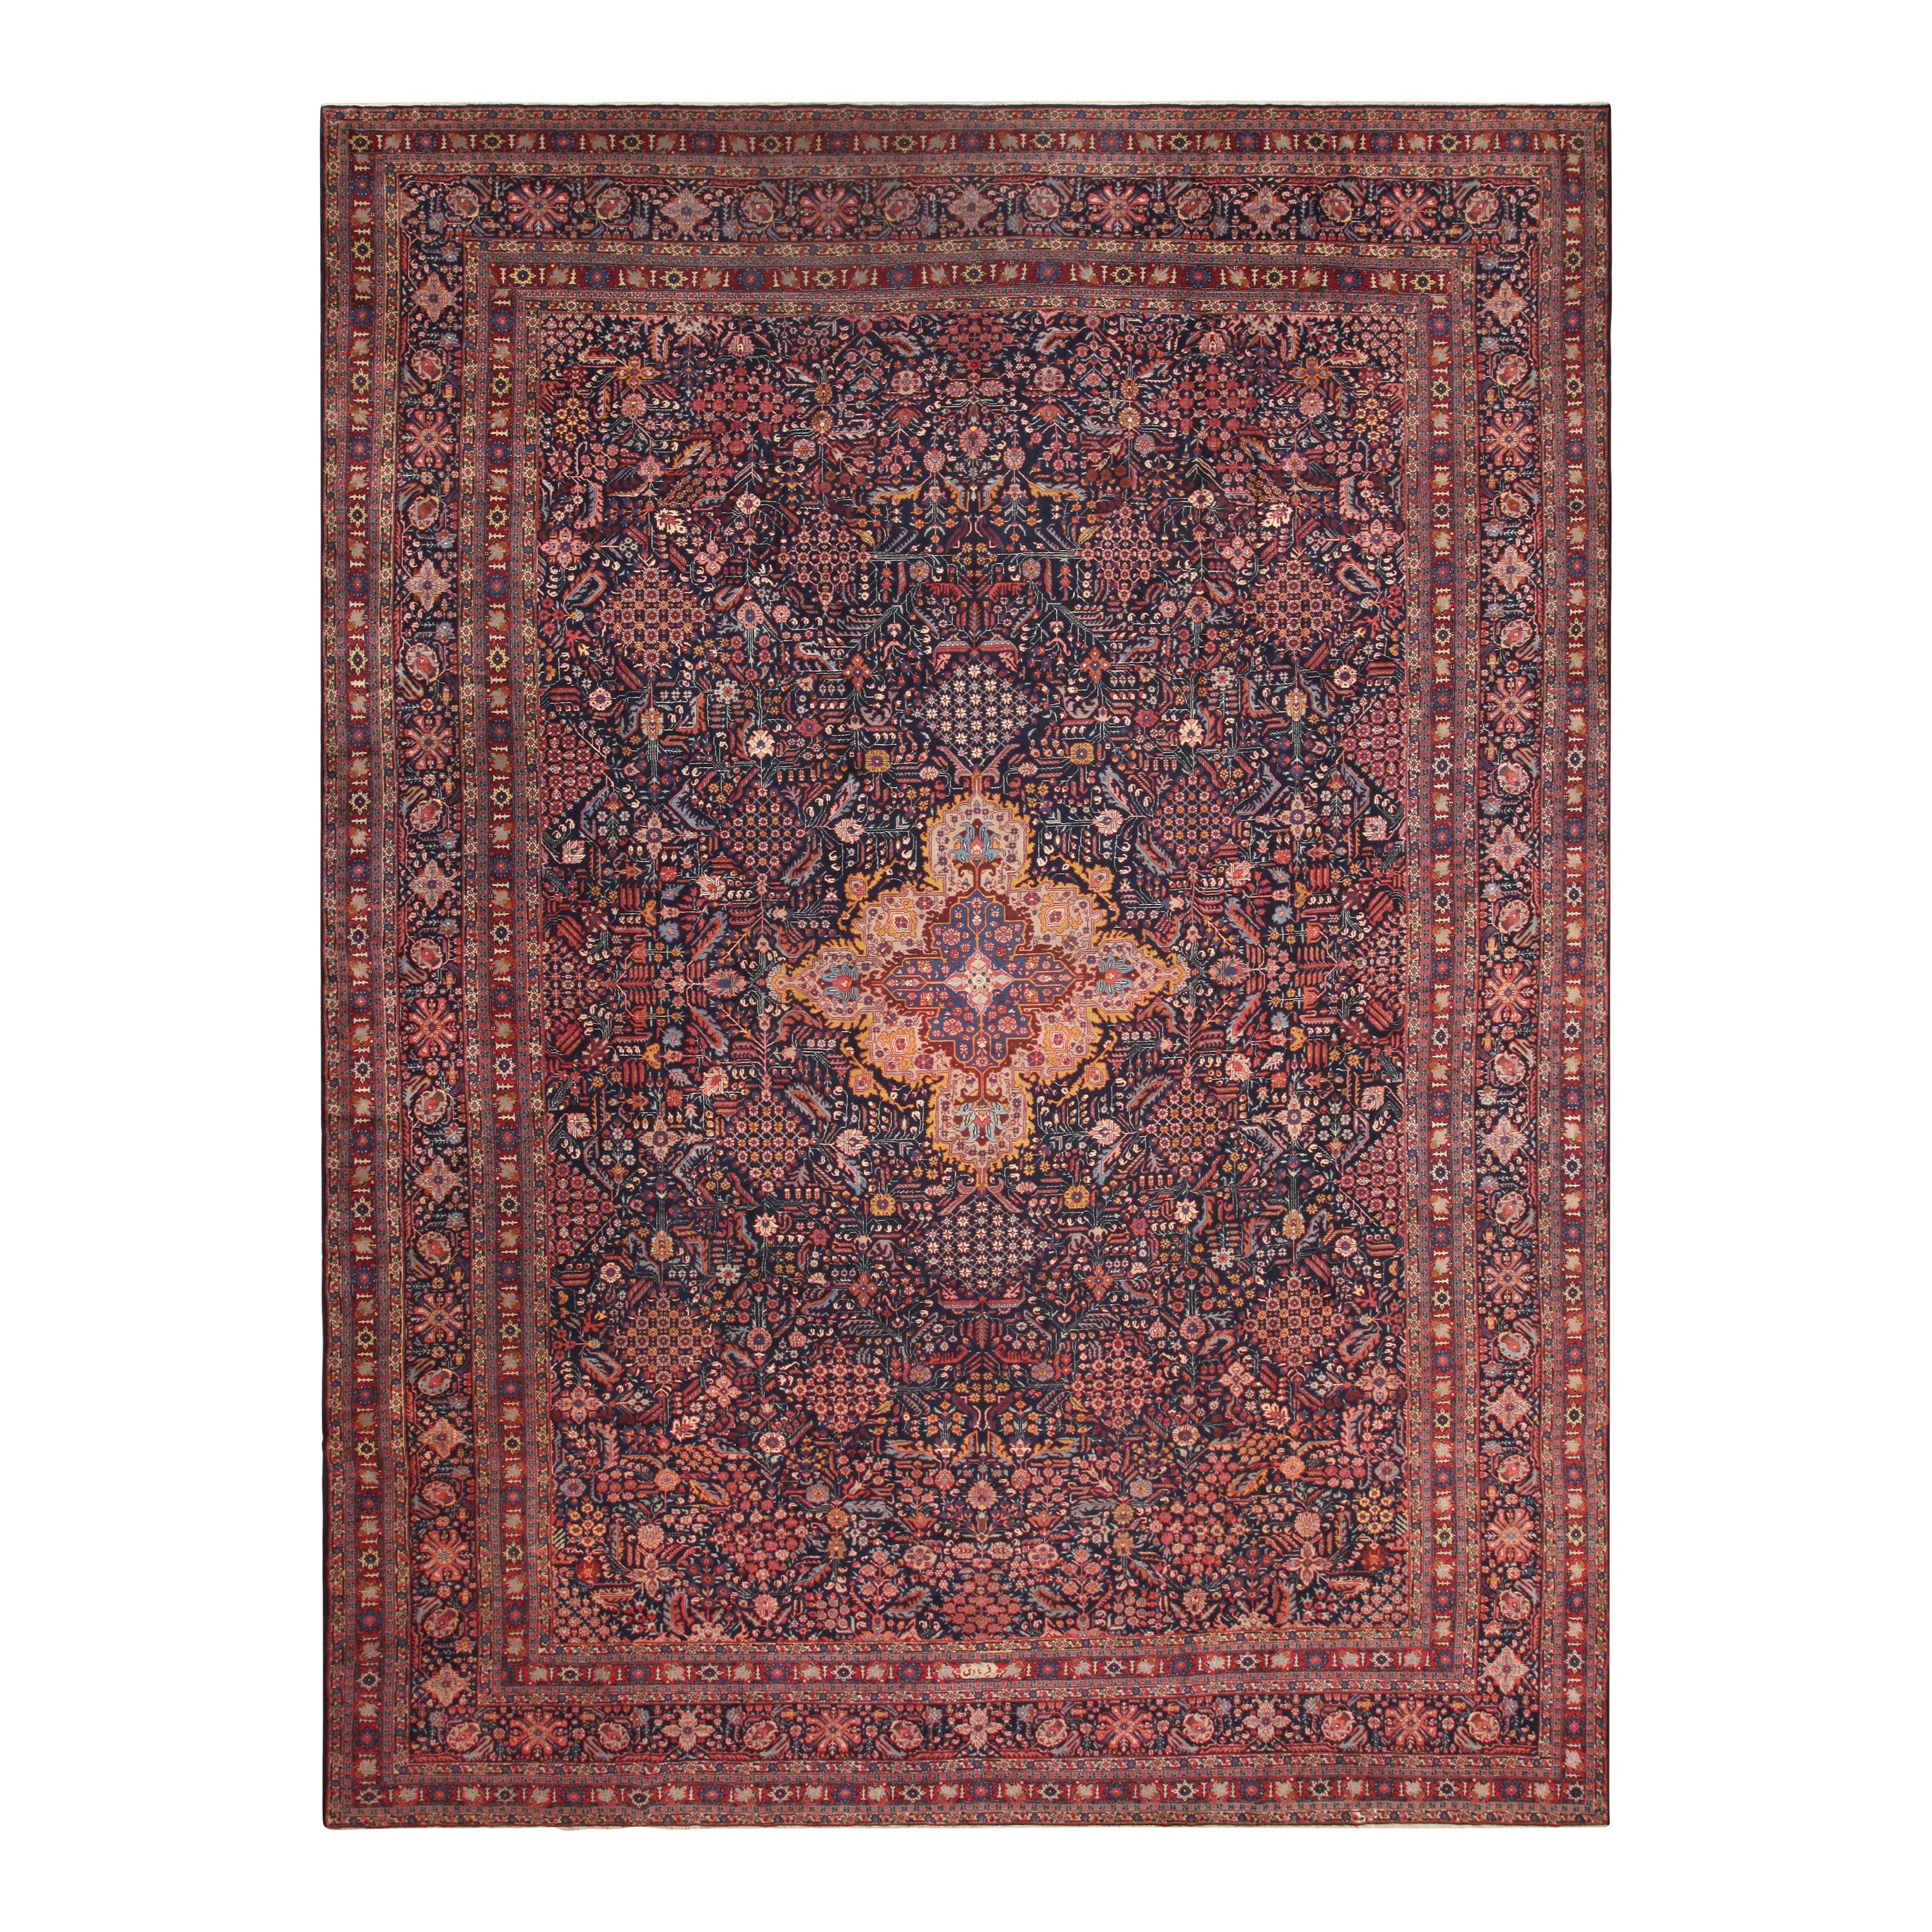 Large Antique Persian Senneh Area Rug. 13 ft x 17 ft 8 in For Sale